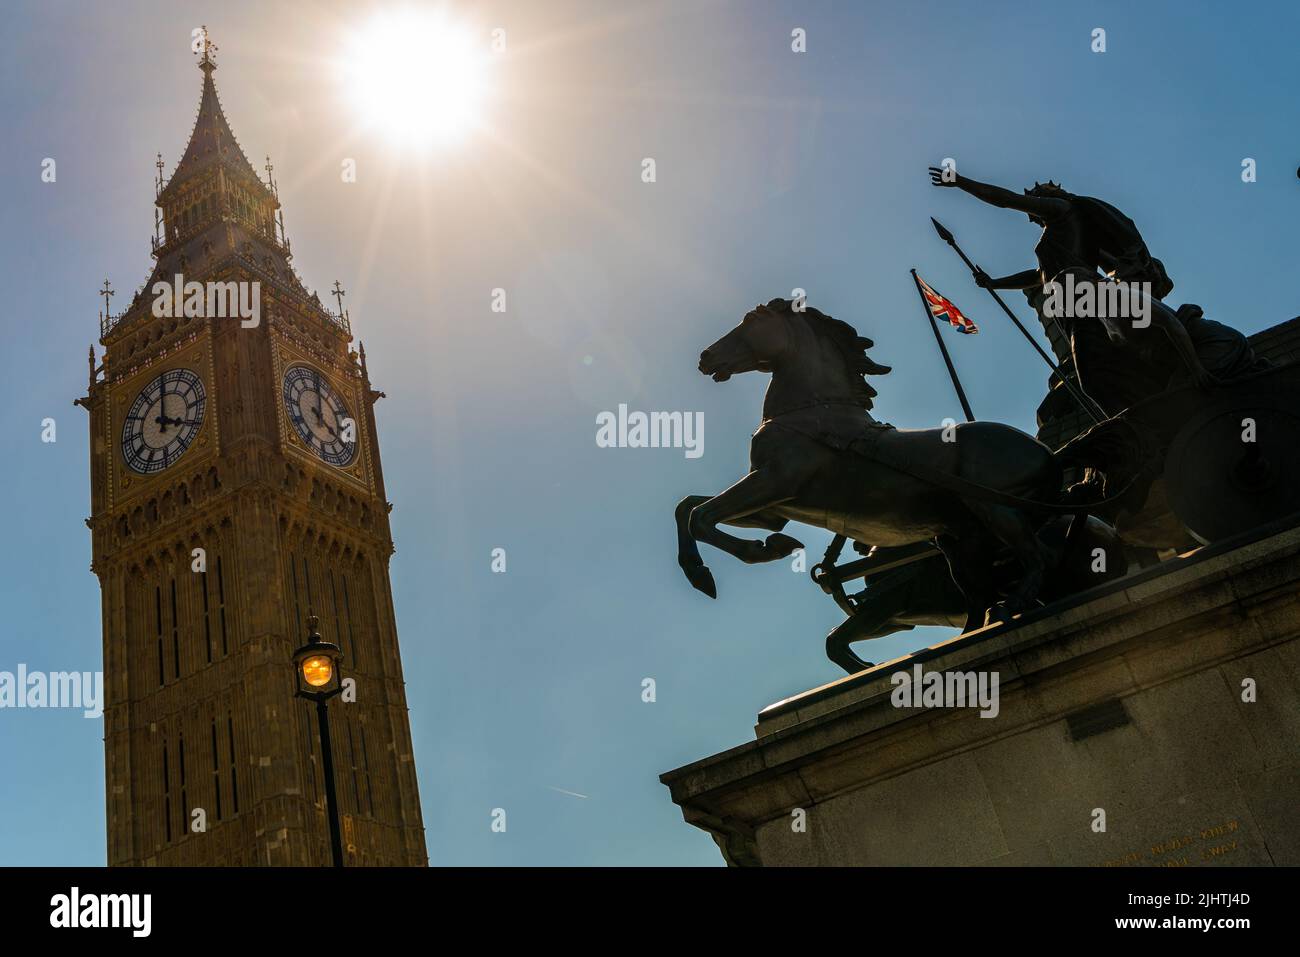 Big Ben, Houses of Parliament and a Union Jack flag flying behind the famous Boadicea or Boudica statue on Westminster Bridge, London, England Stock Photo